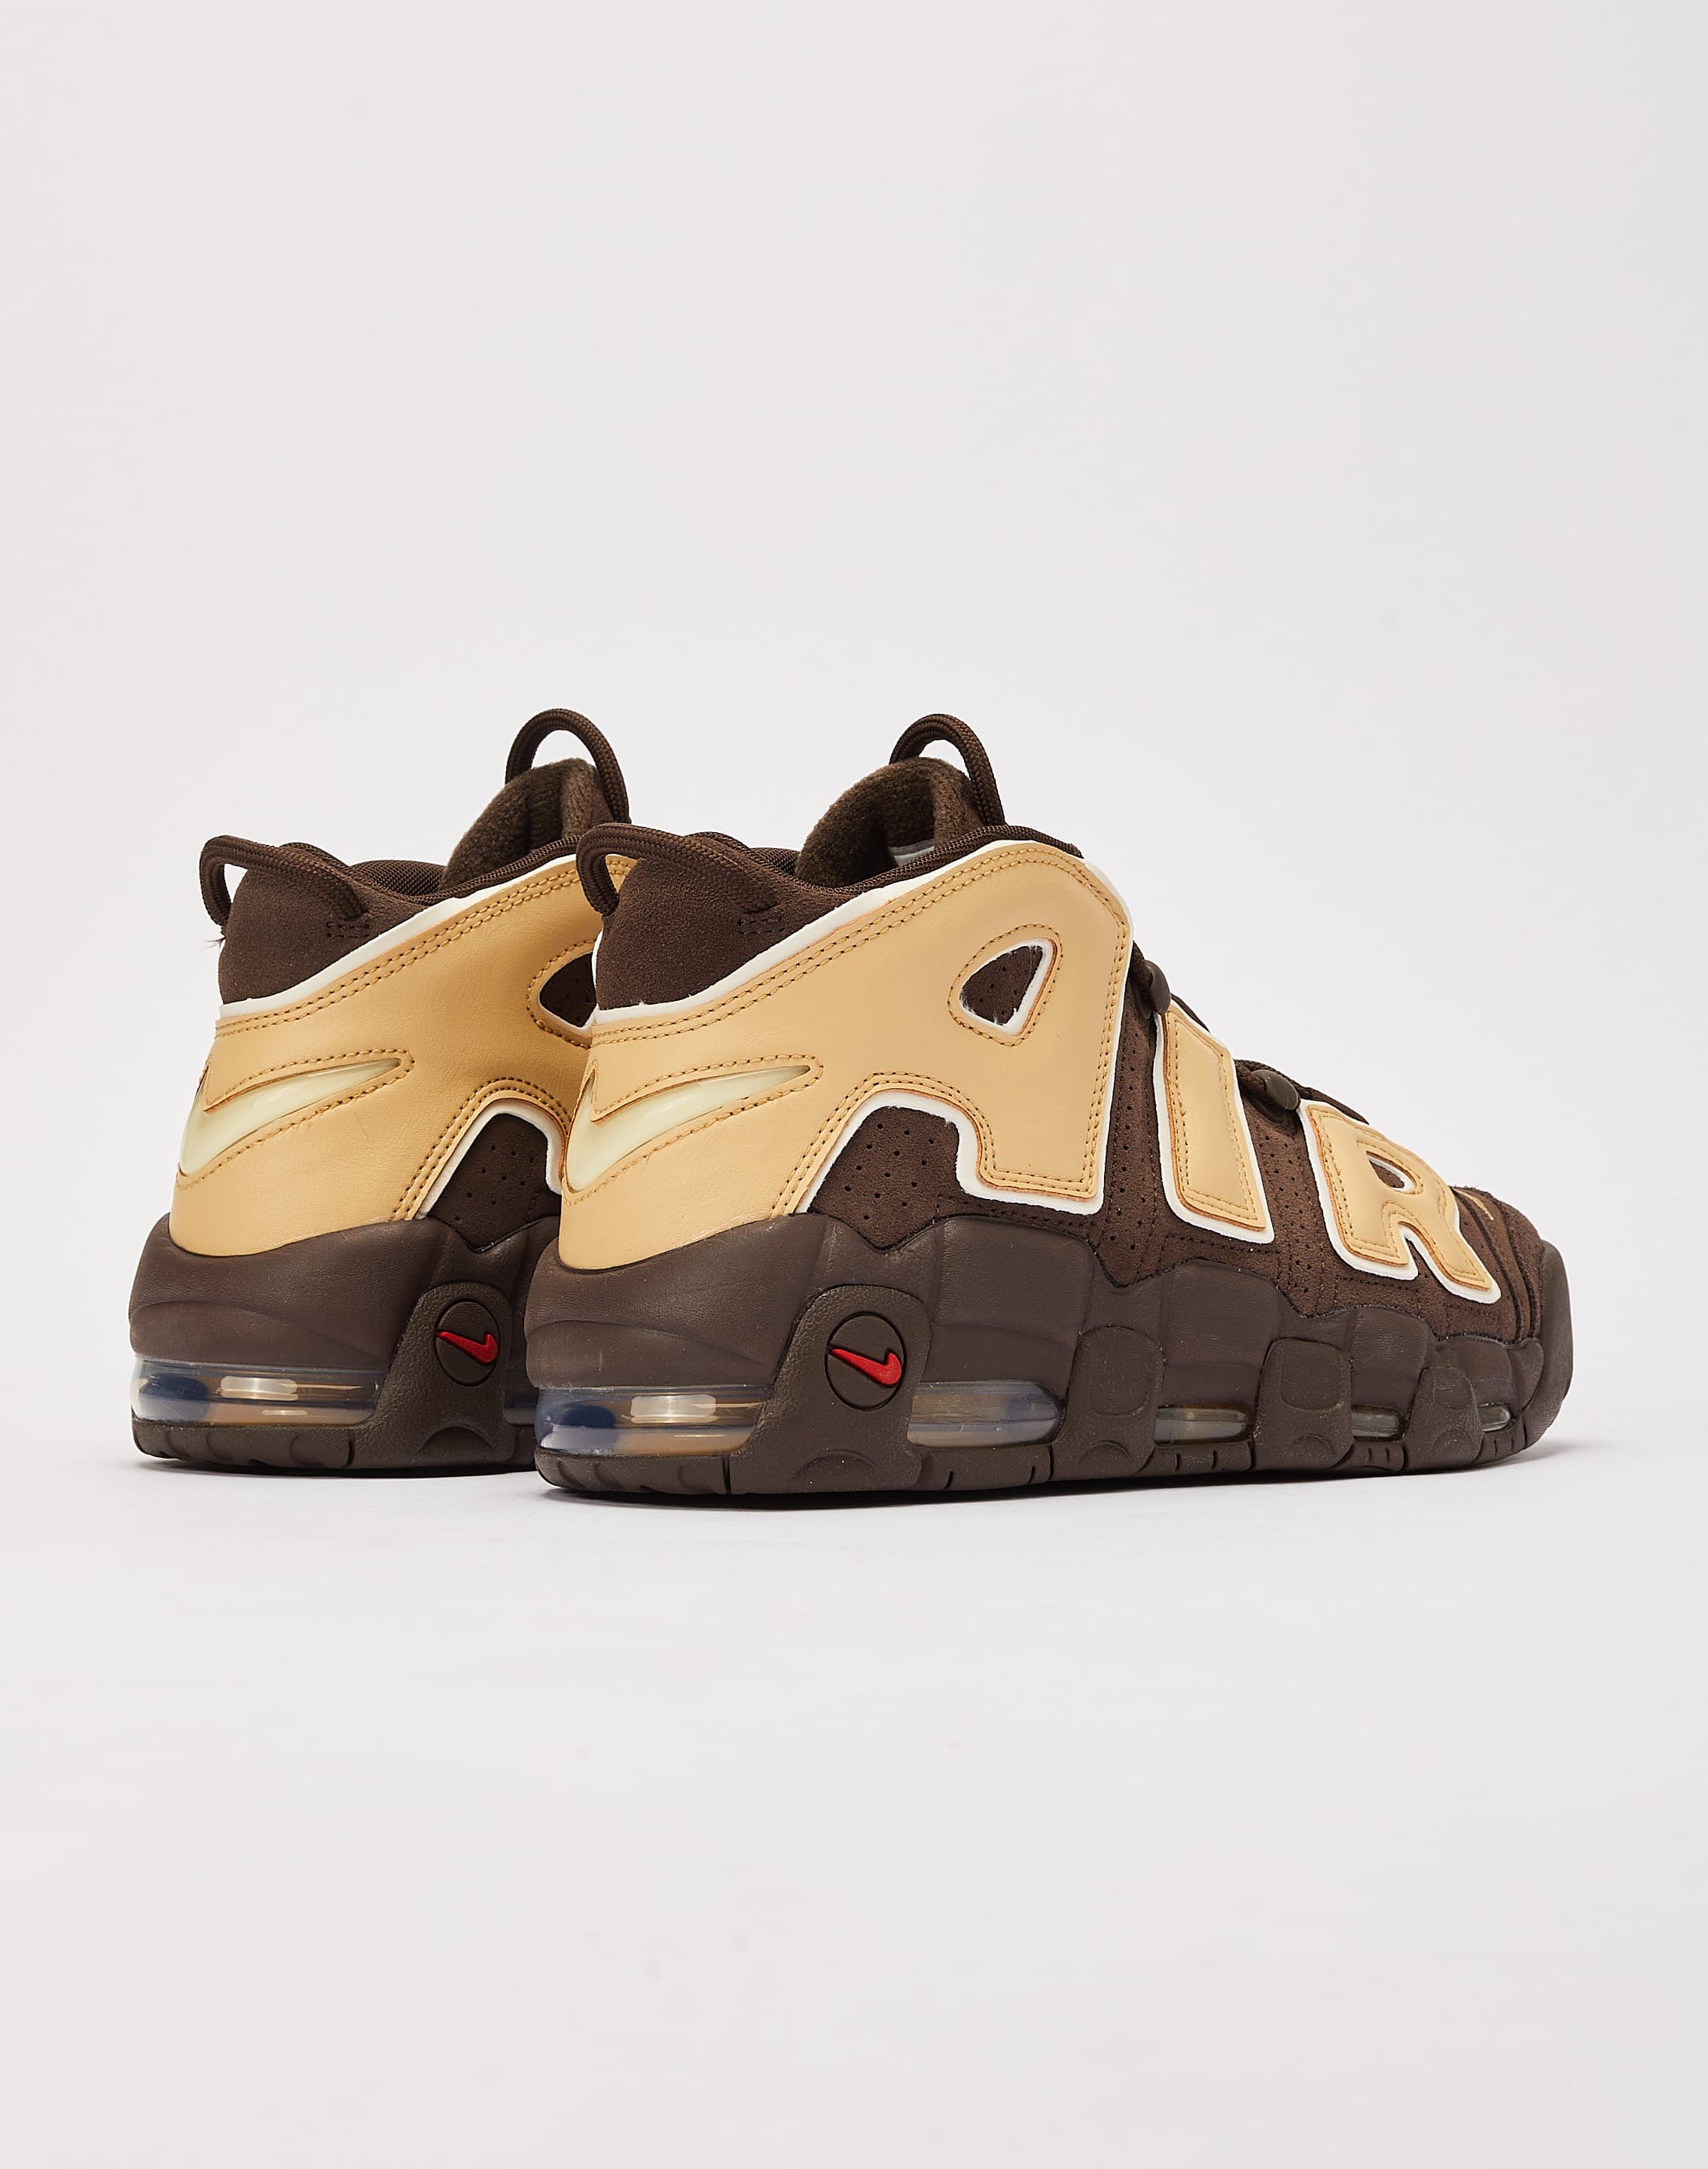 Nike Air More Uptempo '96 – DTLR